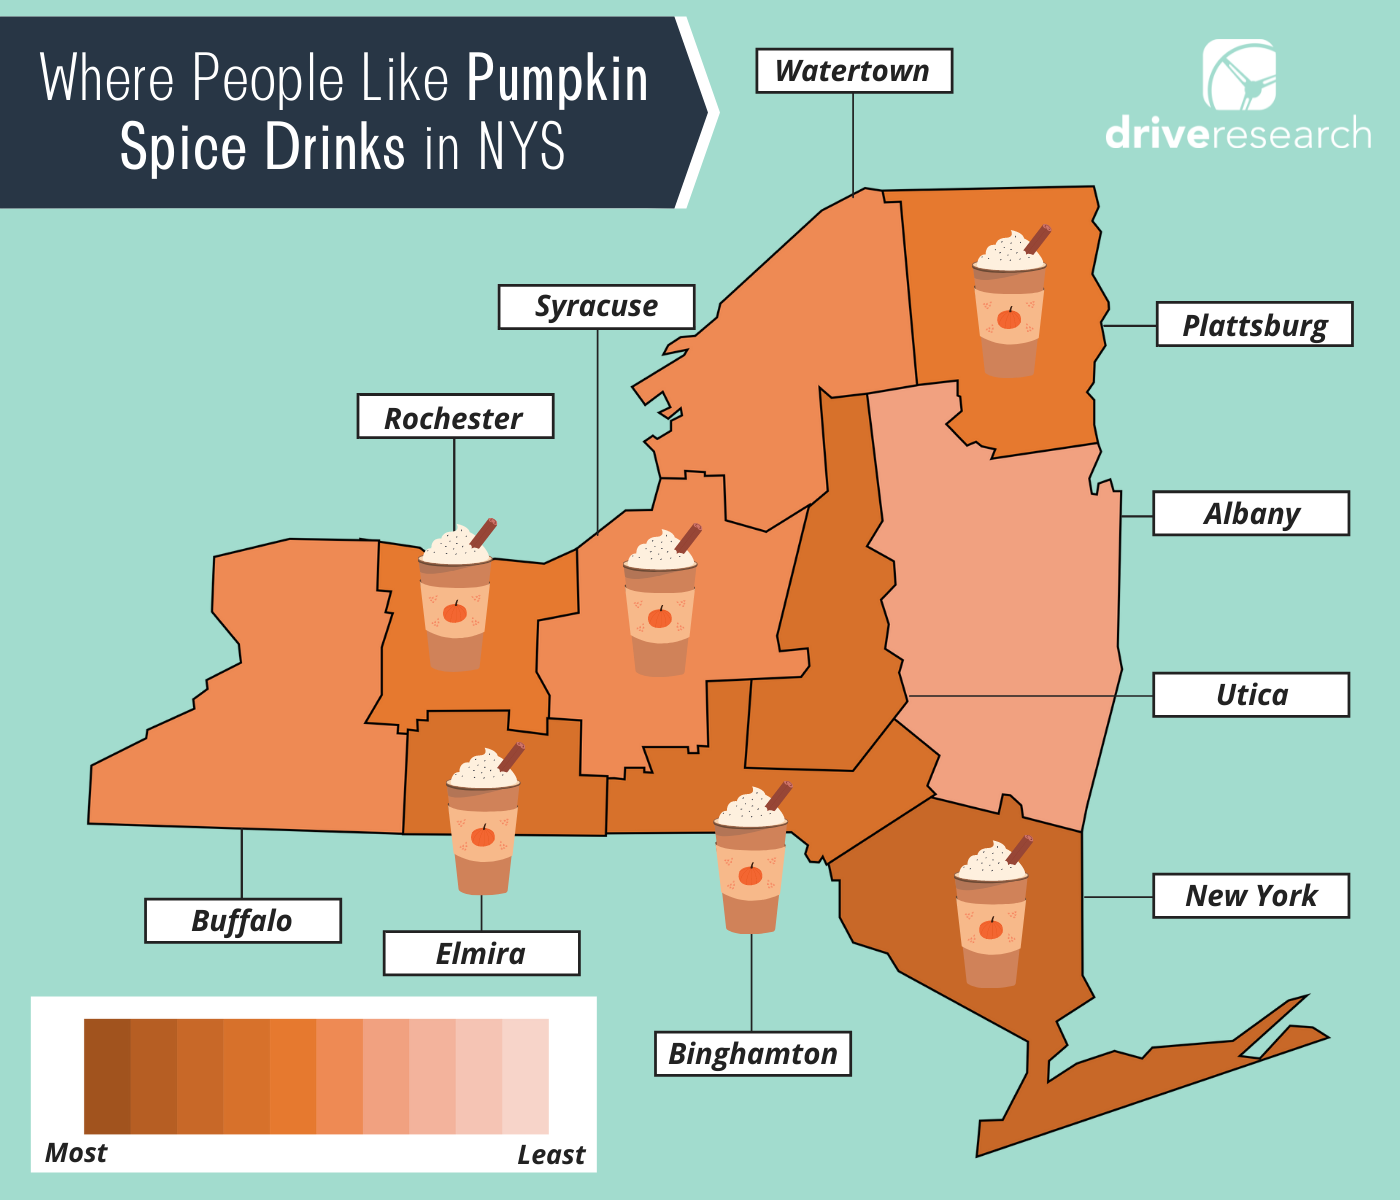 Where People Like Pumpkin Spice Flavored Drinks in New York